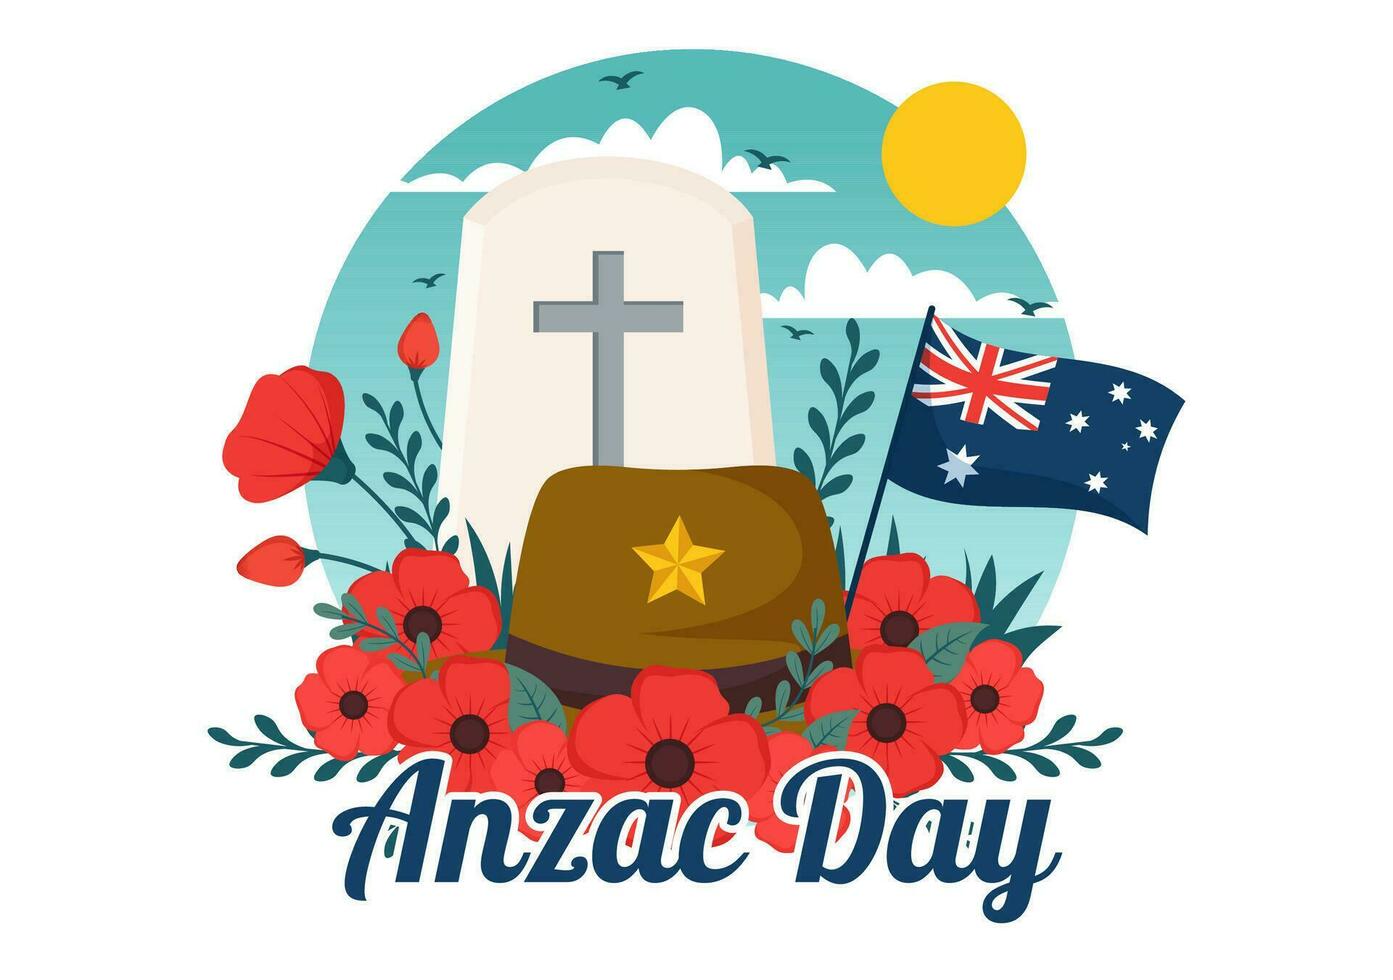 Anzac Day of Lest We Forget Vector Illustration on 25 April with Remembrance Soldier Paying Respect and Red Poppy Flower in Flat Cartoon Background